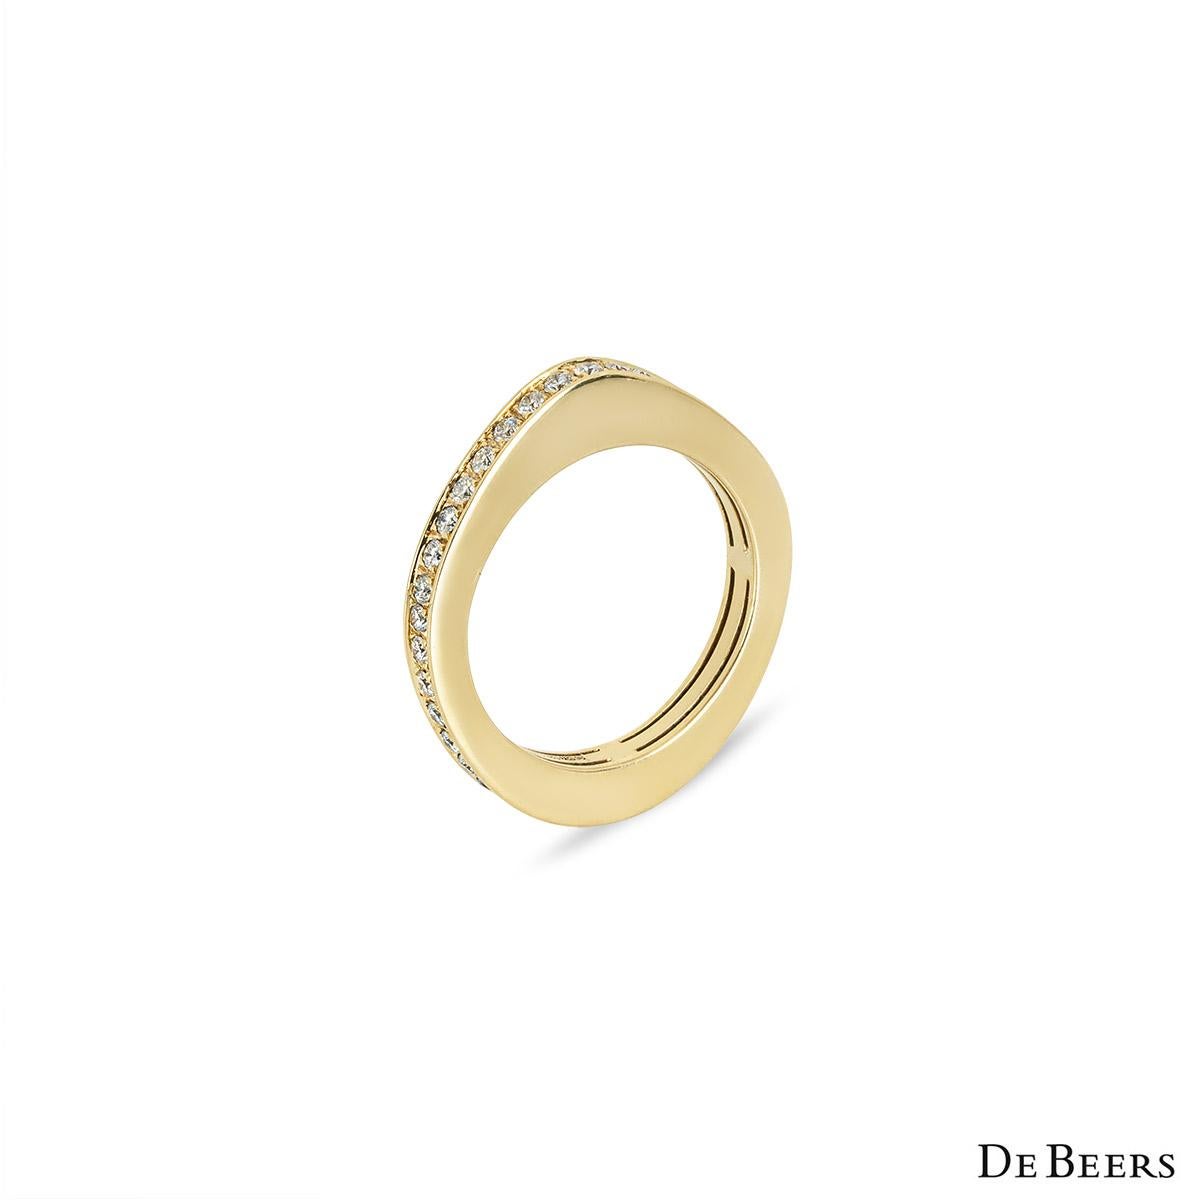 A unique 18k yellow gold diamond full eternity ring by De Beers. The eternity ring is set with 39 round brilliant cut diamonds with an approximate total weight of 0.78ct, F-G colour and VS clarity. The 2.87mm wide ring is a size UK N - EU 53 and has